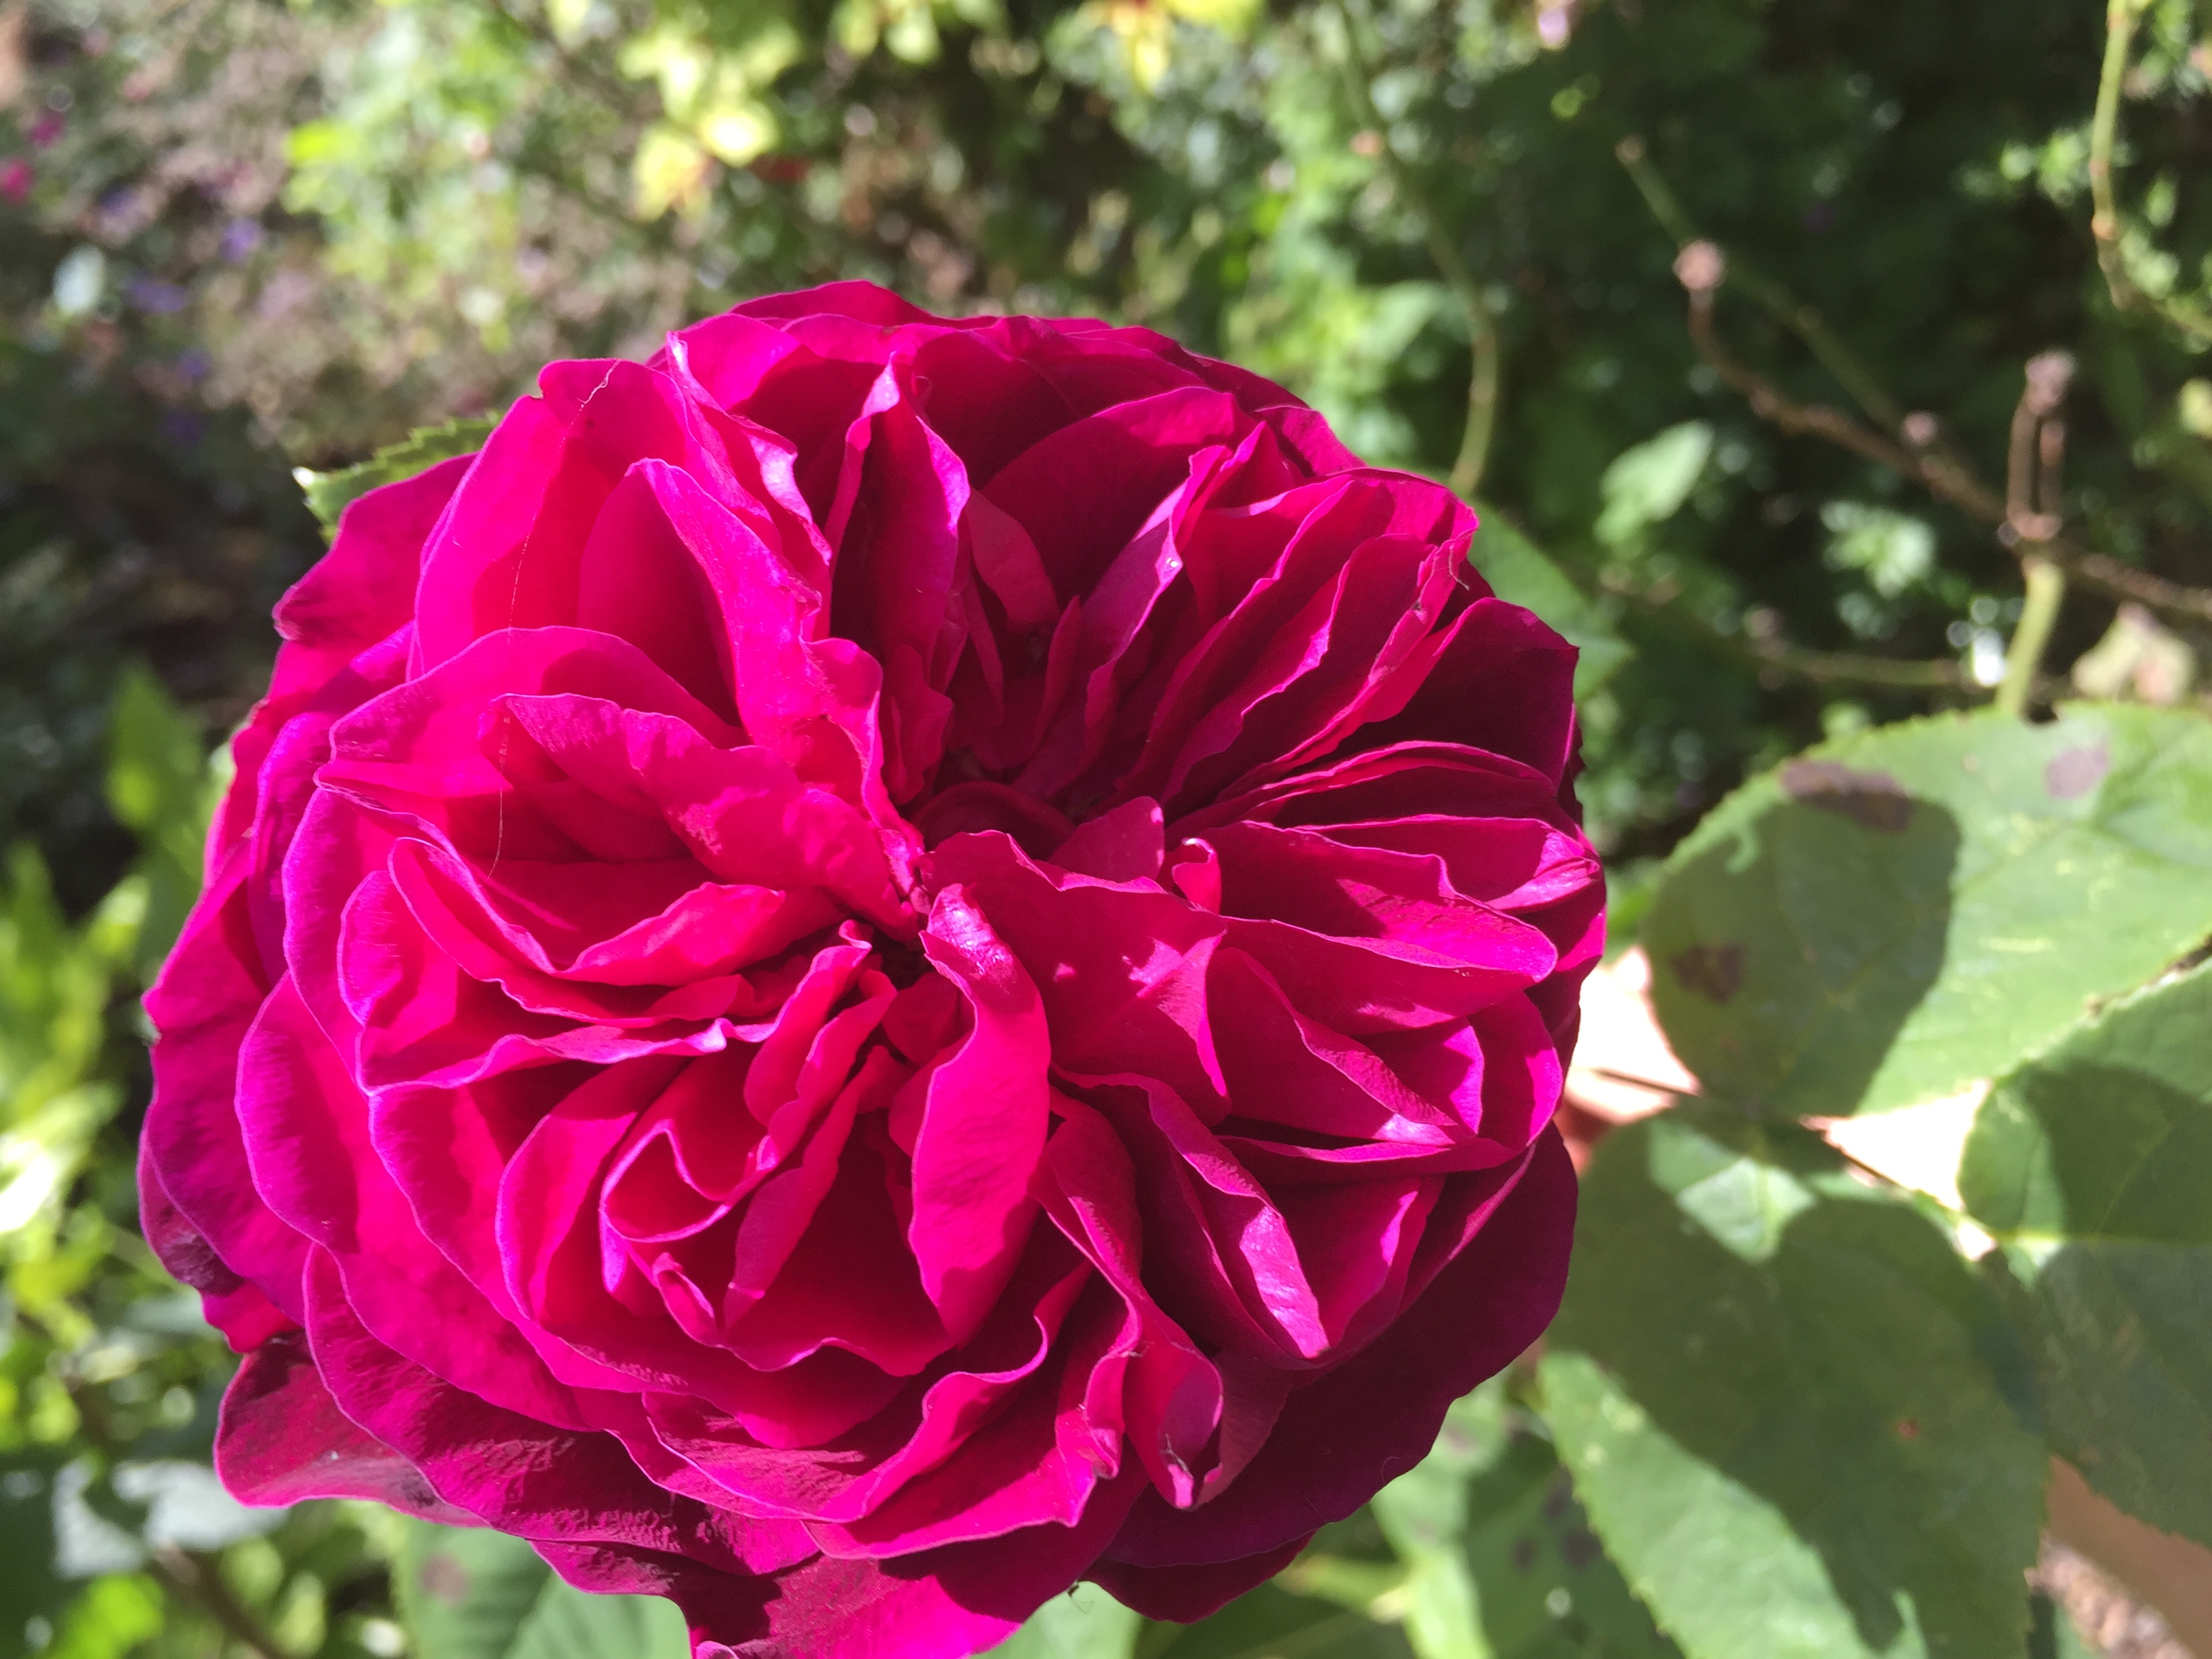 Damask rose is best for use with rosewater